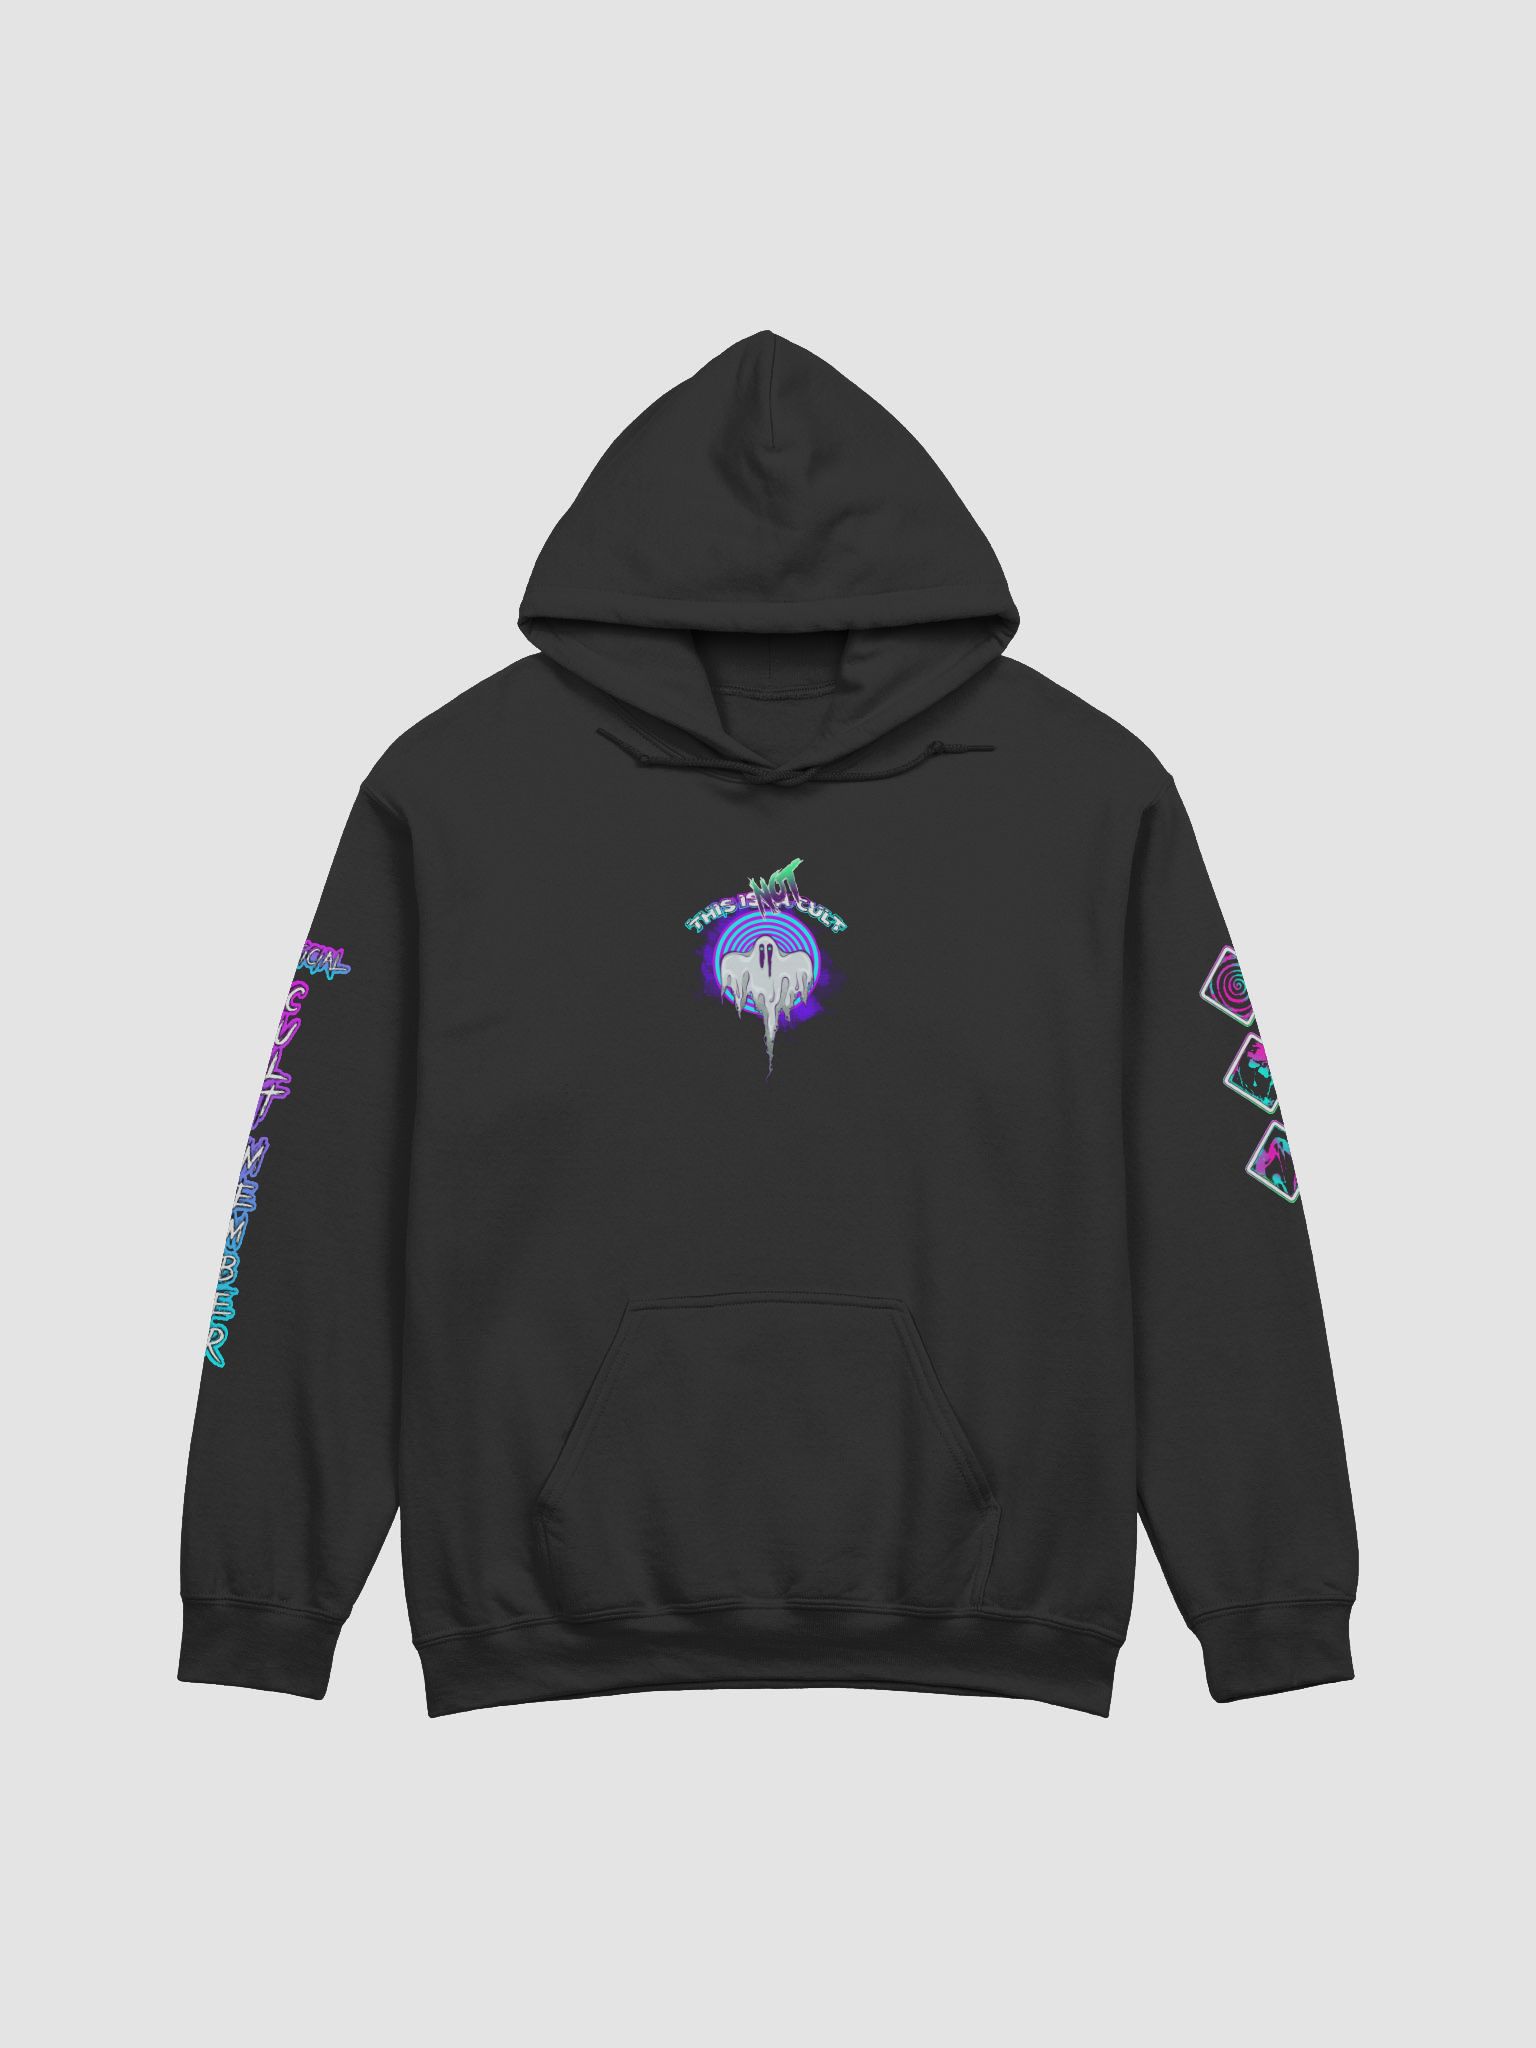 Cult Leader Hoodie - with Sleeve Accents | Gh0stArcade